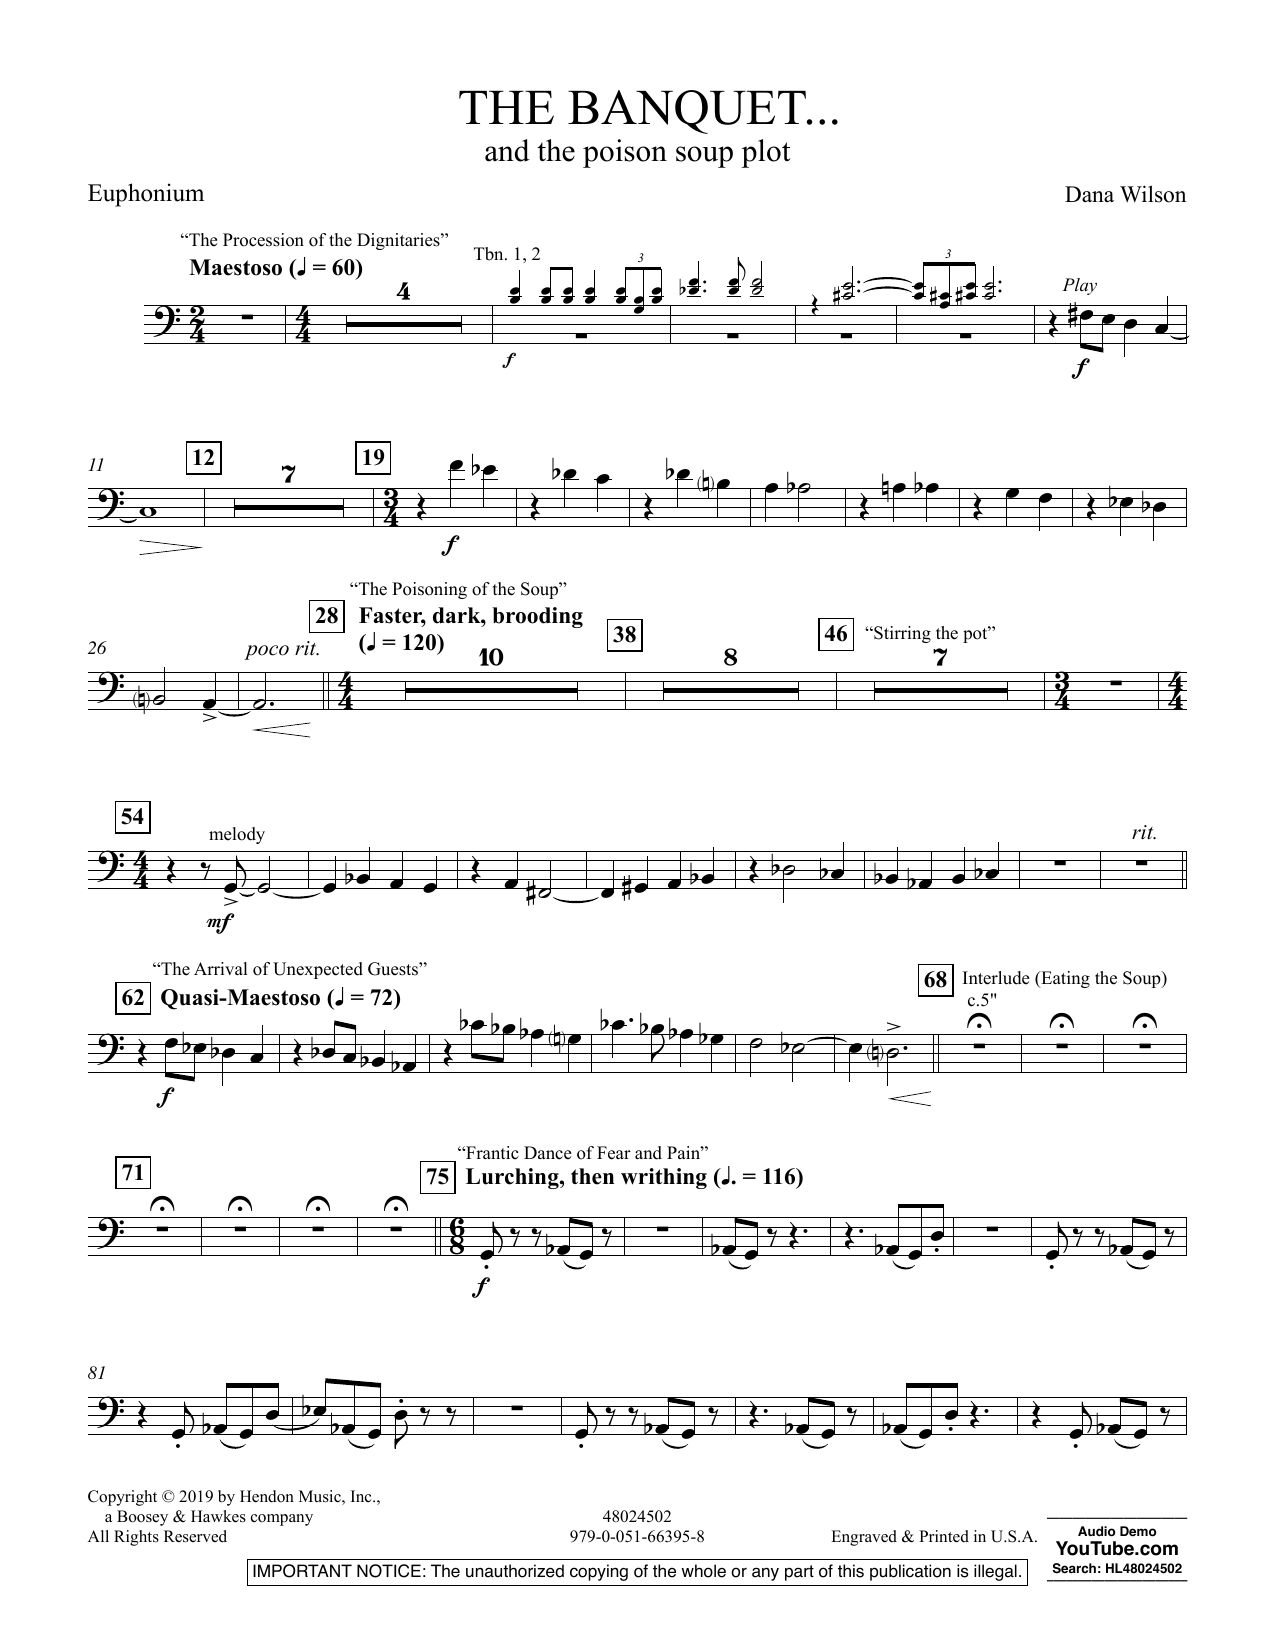 Dana Wilson The Banquet...and the poison soup plot - Euphonium sheet music preview music notes and score for Concert Band including 2 page(s)